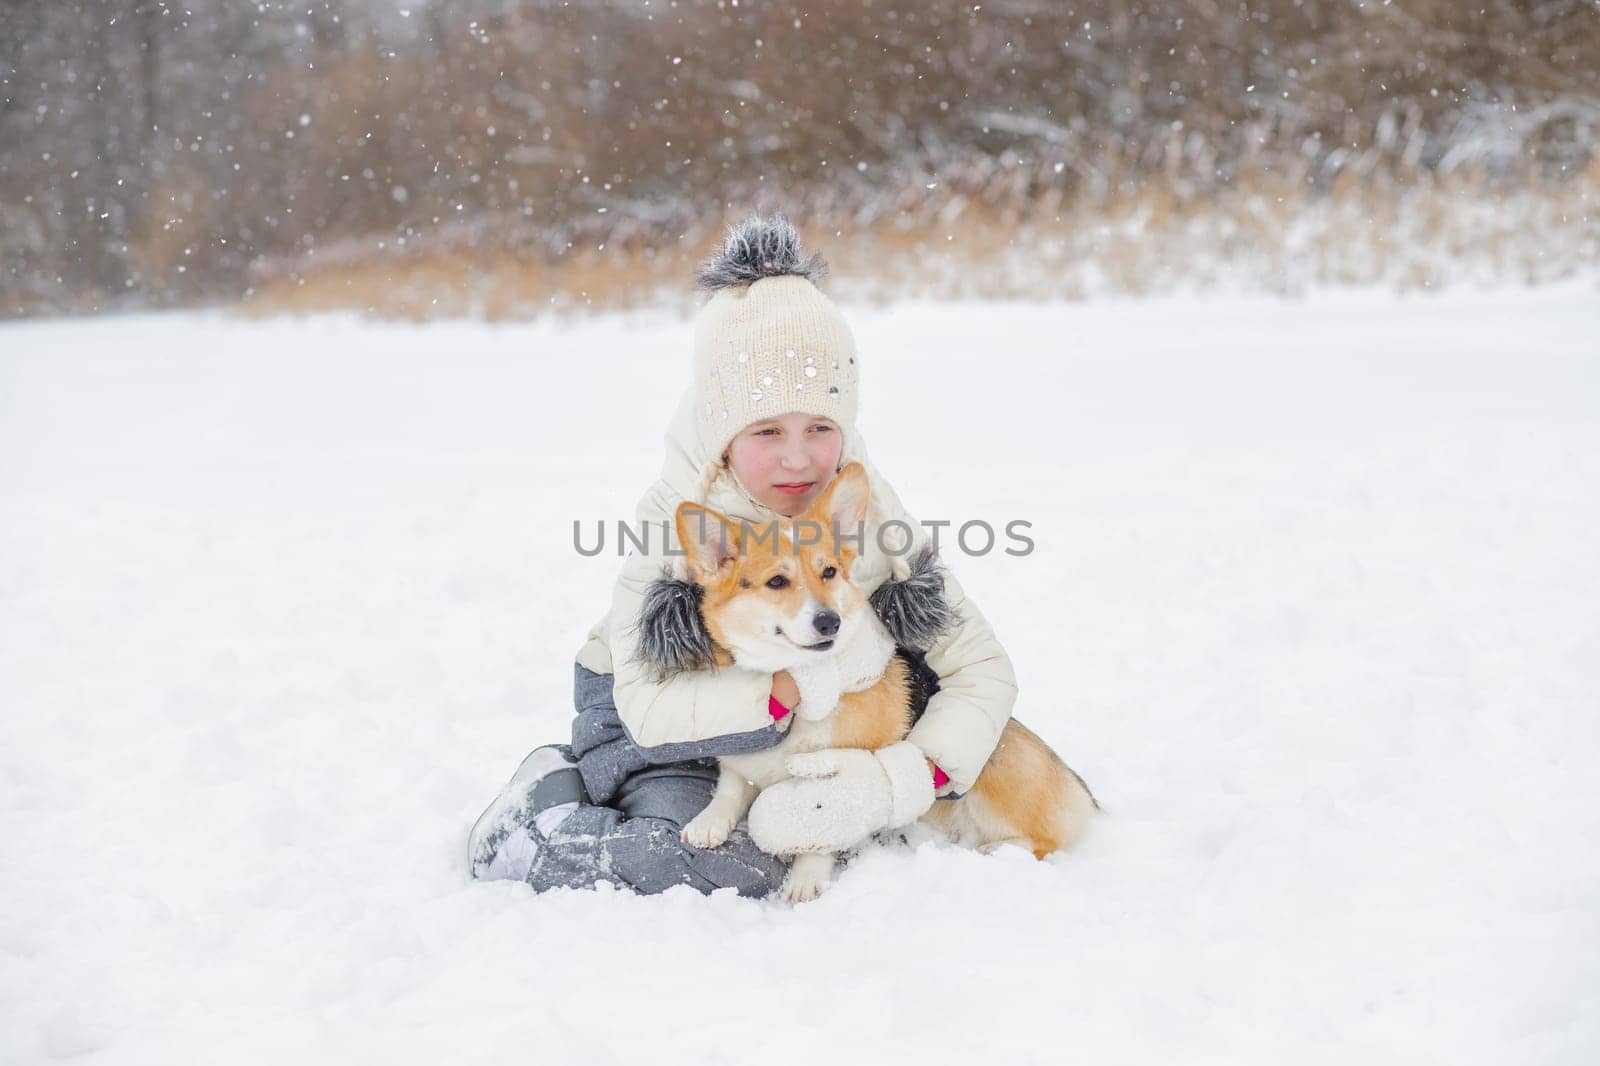 A Young happy woman having fun in snowy winter park with Corgi baby dog